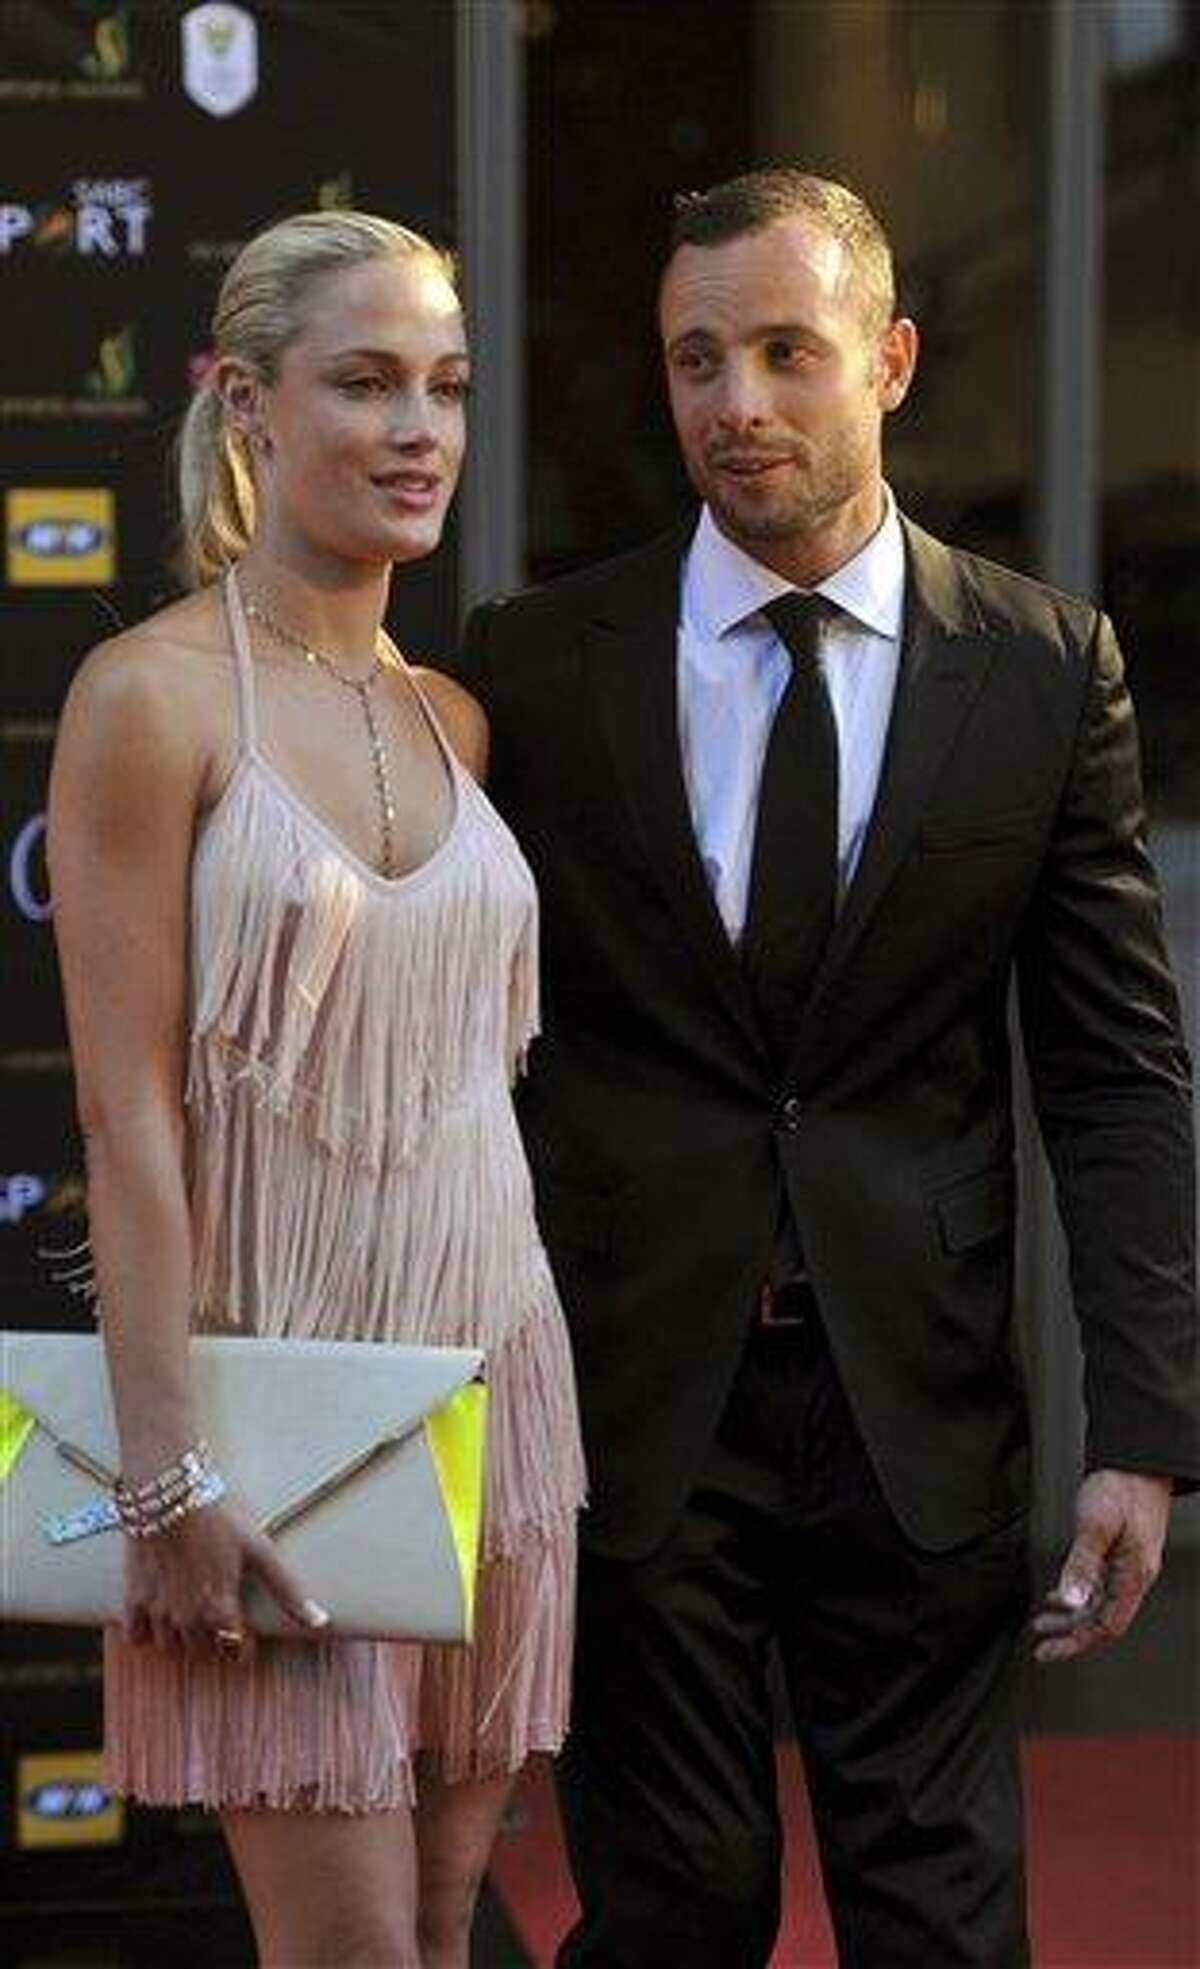 South African Olympic athlete Oscar Pistorius and Reeva Steenkamp, believed to be his girlfriend, at an awards ceremony, in Johannesburg, South Africa. Olympic athlete Oscar Pistorius was taken into custody and was expected to appear in court Thursday, Feb. 14, 2013, after a 30-year-old woman who was believed to be his girlfriend was shot dead at his home in South Africa's capital, Pretoria. AP Photo/Lucky Nxumalo-Citypress